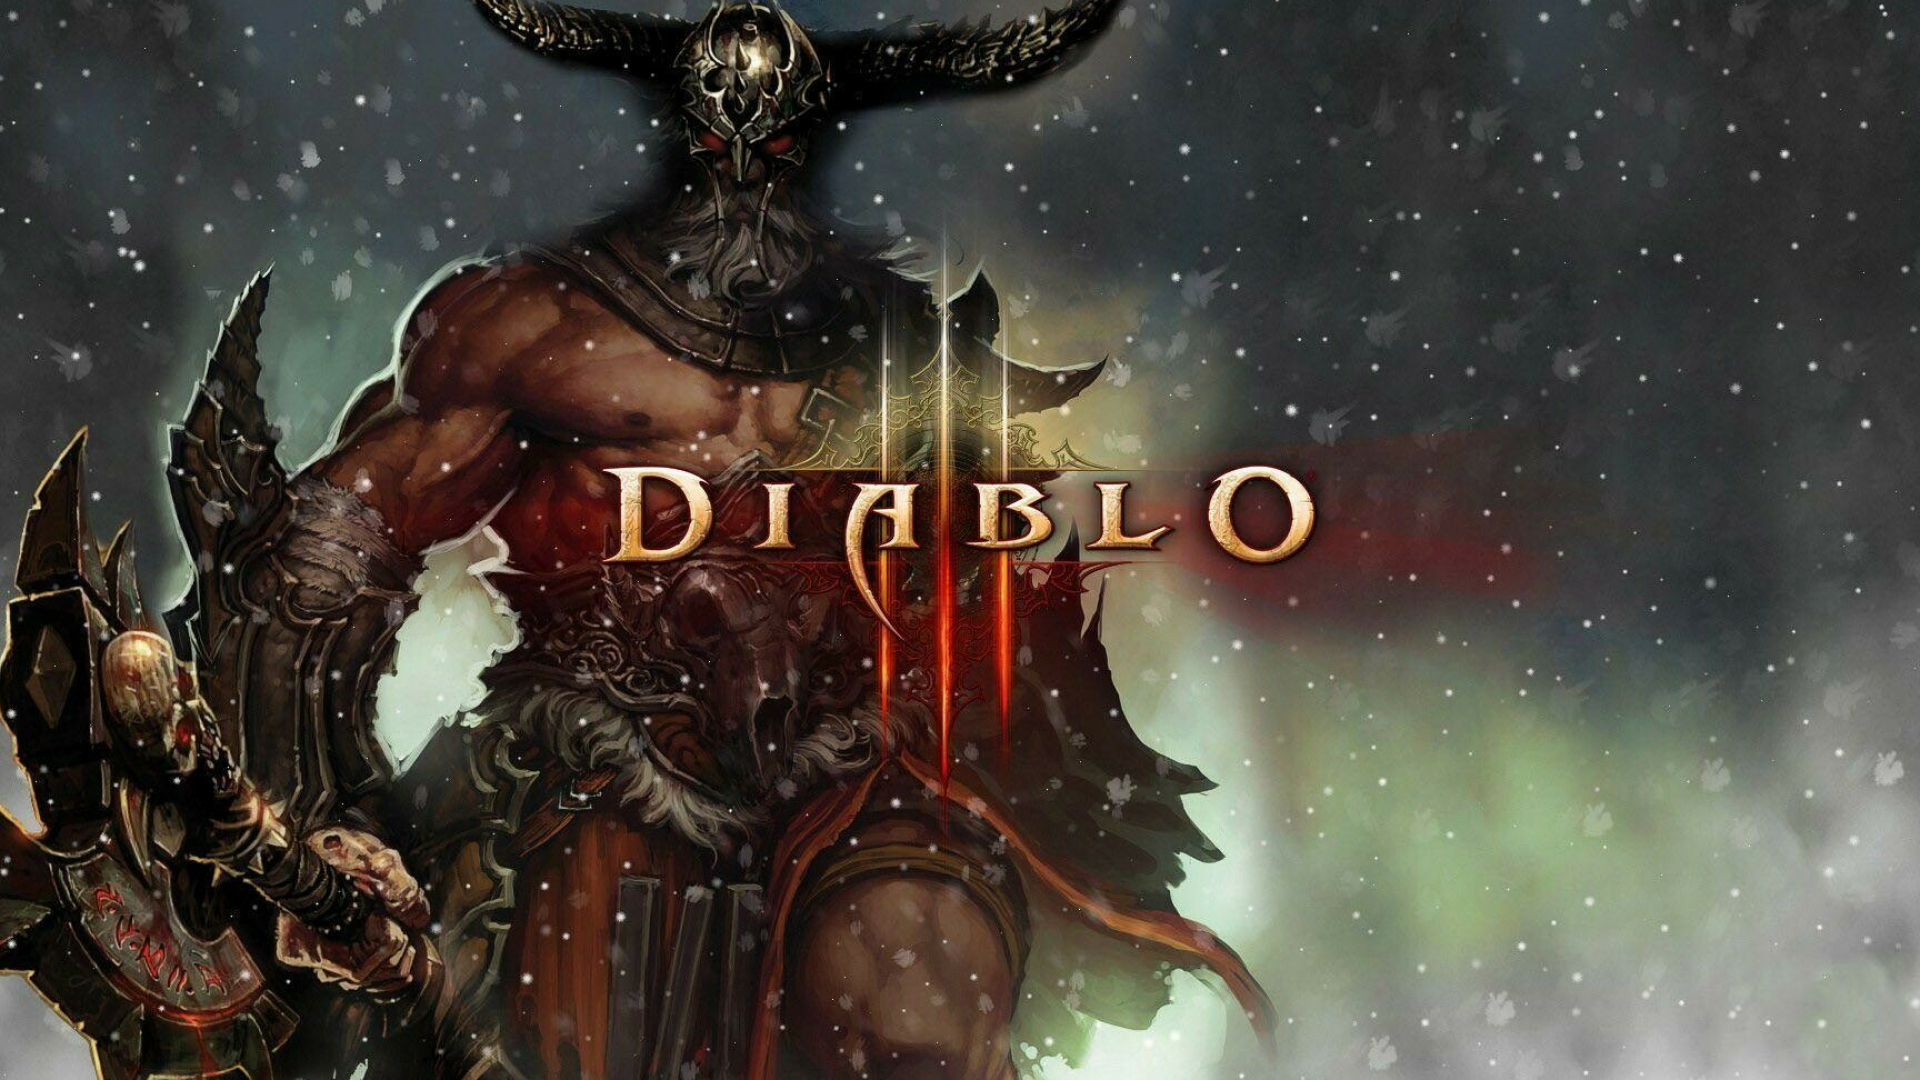 Diablo: The game awarded GameSpot's Game of the Year Award for 1996. 1920x1080 Full HD Wallpaper.